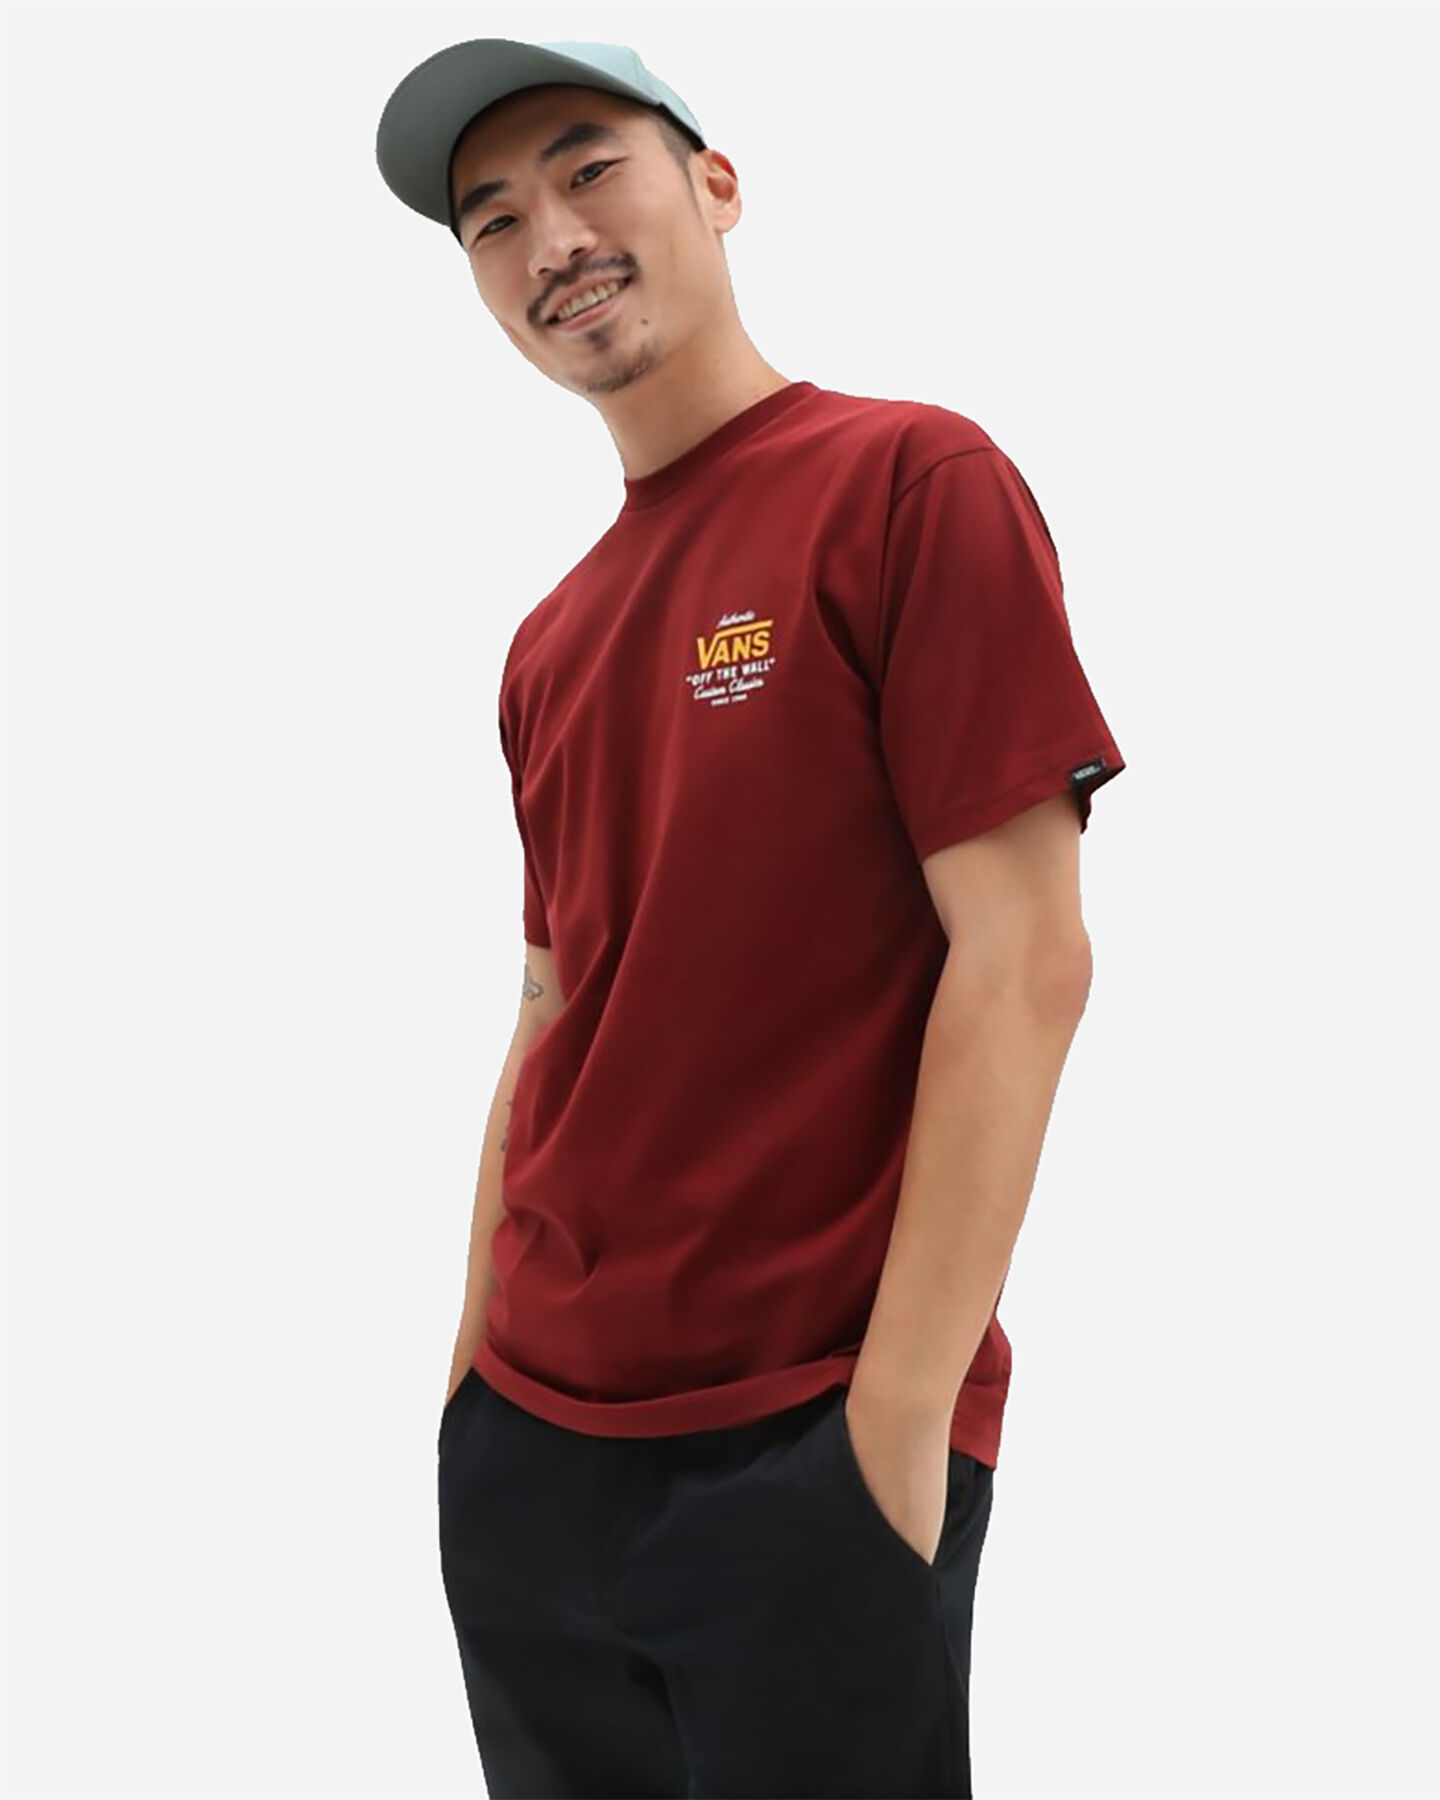  T-Shirt VANS HOLDER CLASSIC M S5556245|BWE|XS scatto 0